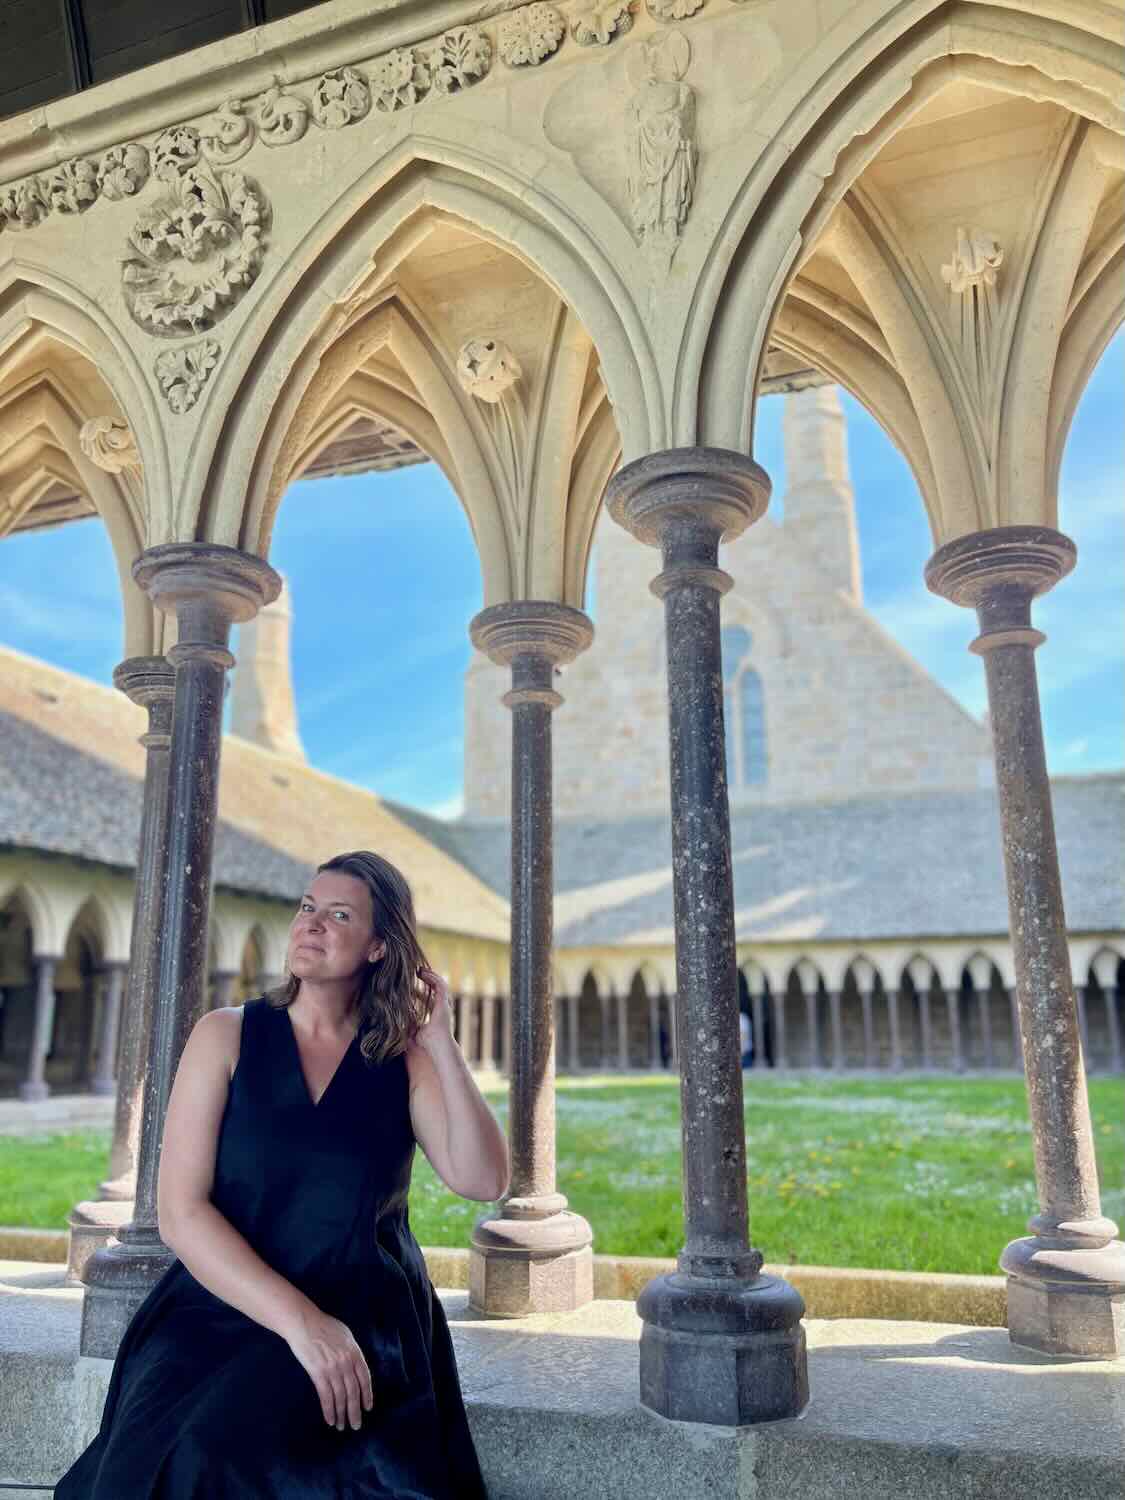 A solo female traveler sits thoughtfully in the Gothic cloisters of Mont Saint Michel Abbey, surrounded by ornate arches and a serene atmosphere.